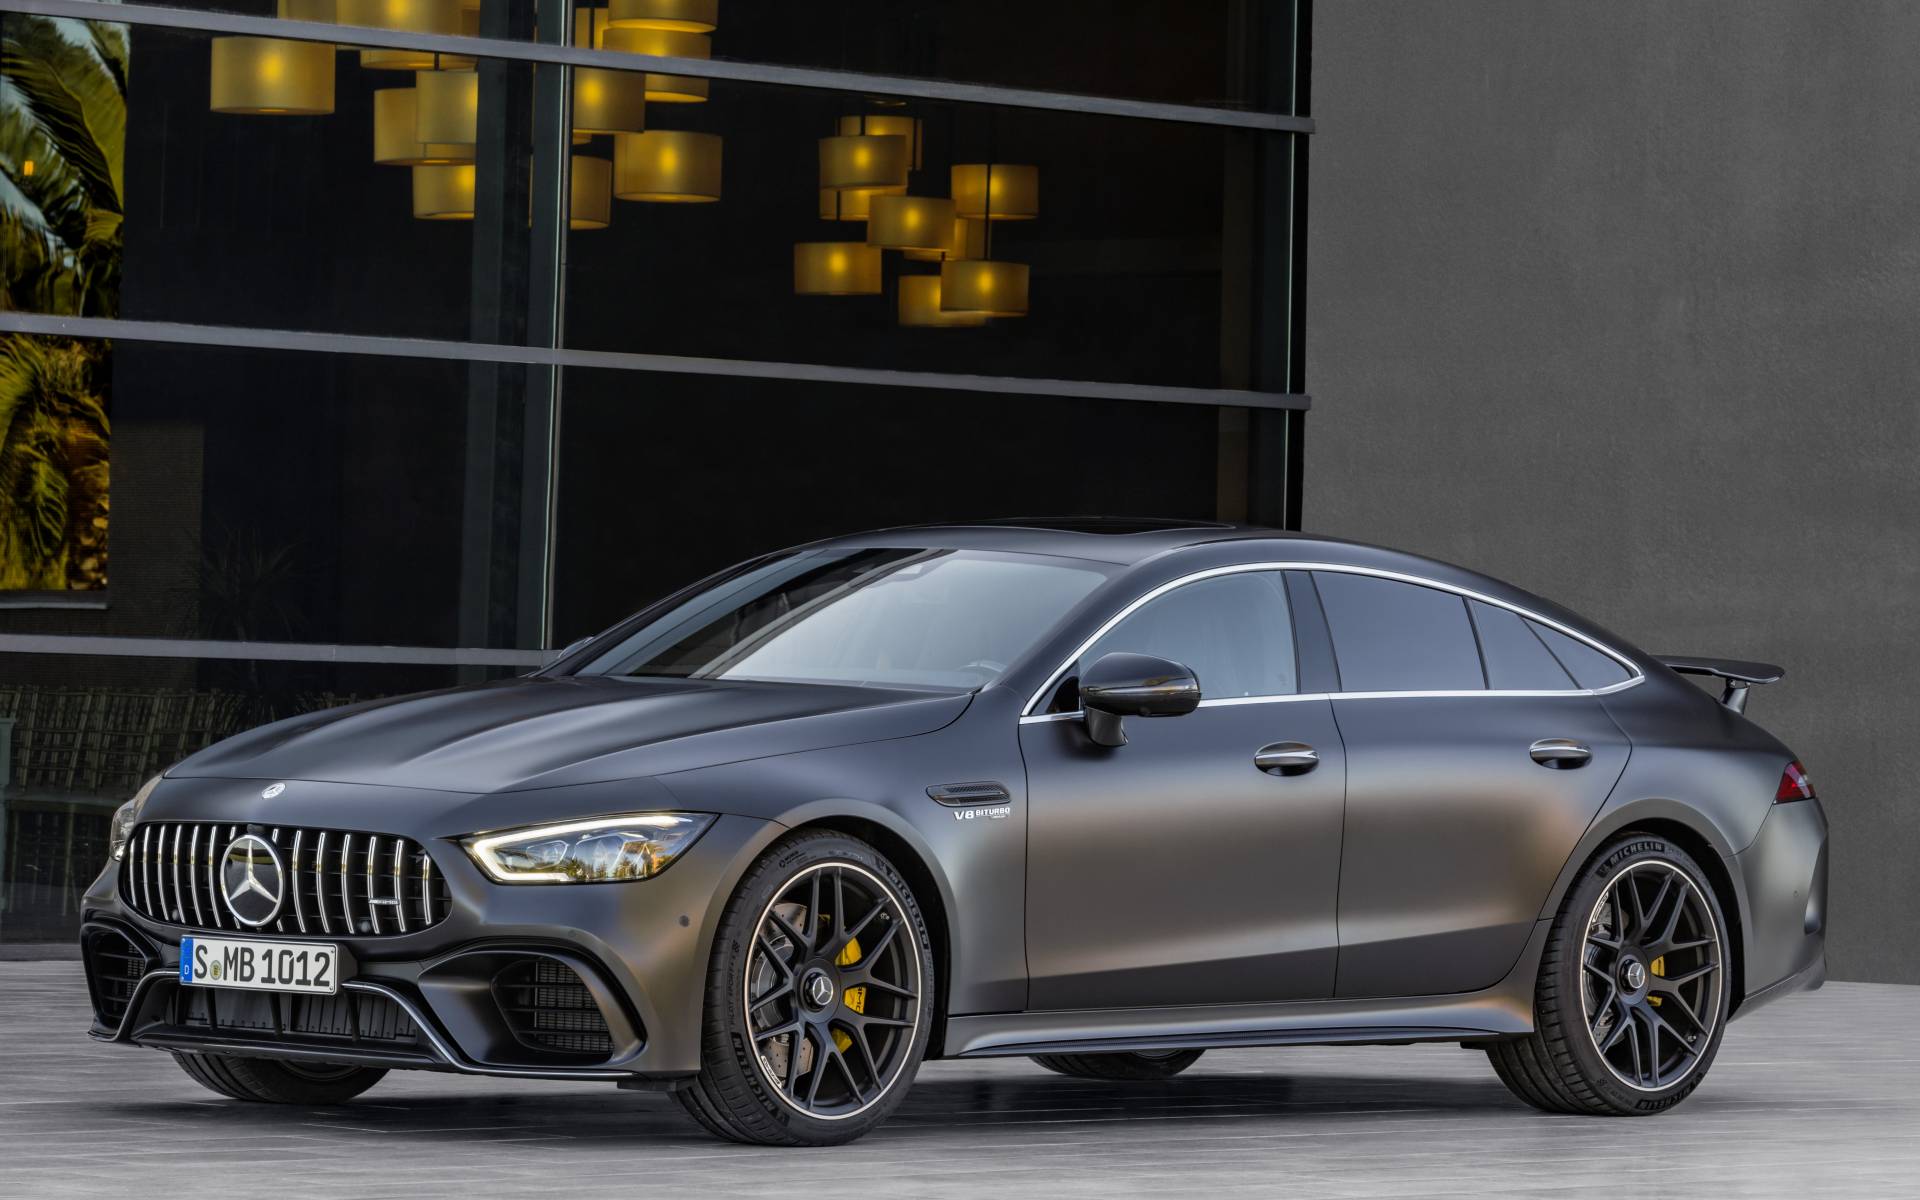 Mercedes Benz Amg Gt 4 Door Coupe 53 4matic Specifications The Car Guide